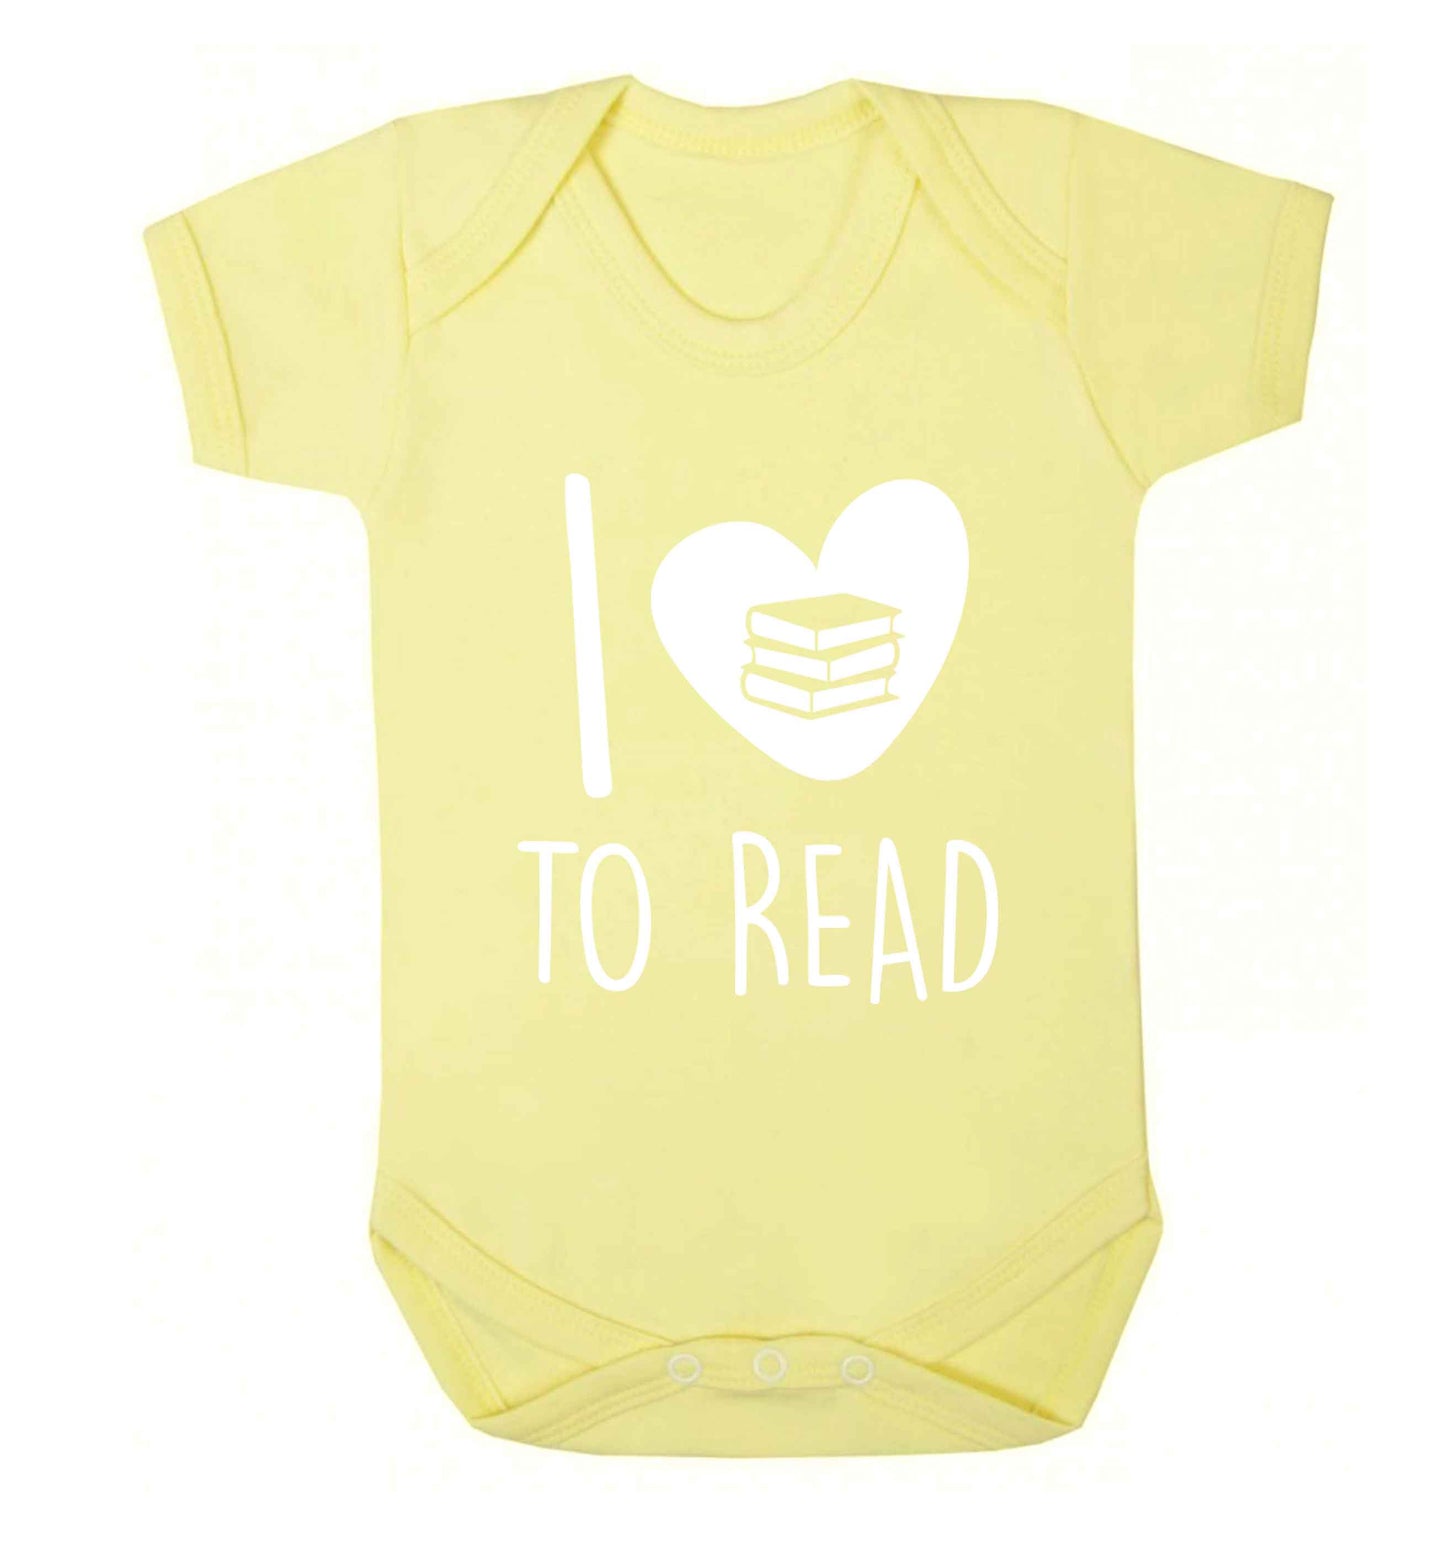 I love to read Baby Vest pale yellow 18-24 months